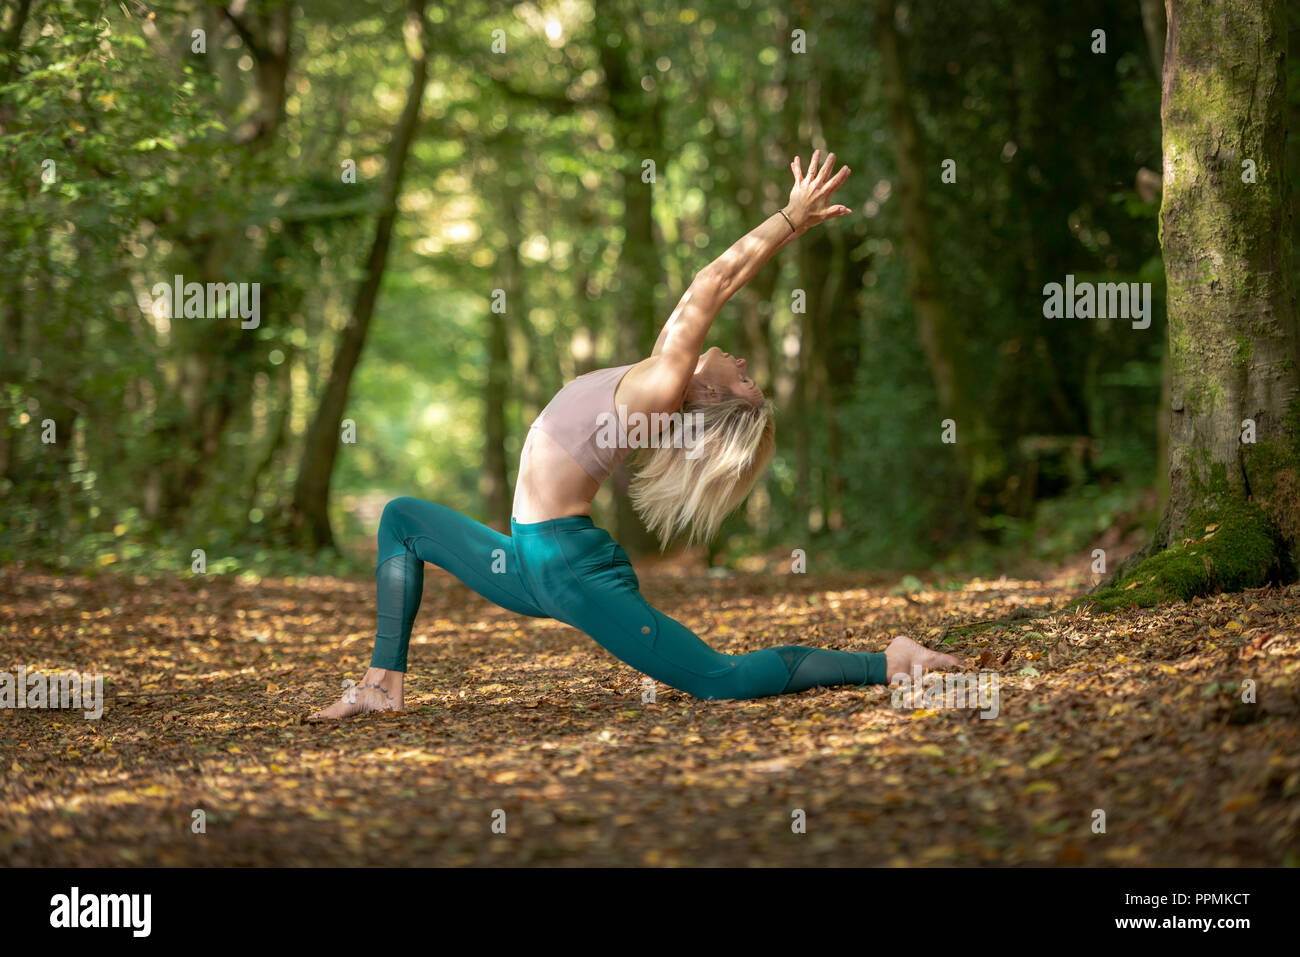 https://c8.alamy.com/comp/PPMKCT/woman-practicing-yoga-in-nature-woodland-PPMKCT.jpg